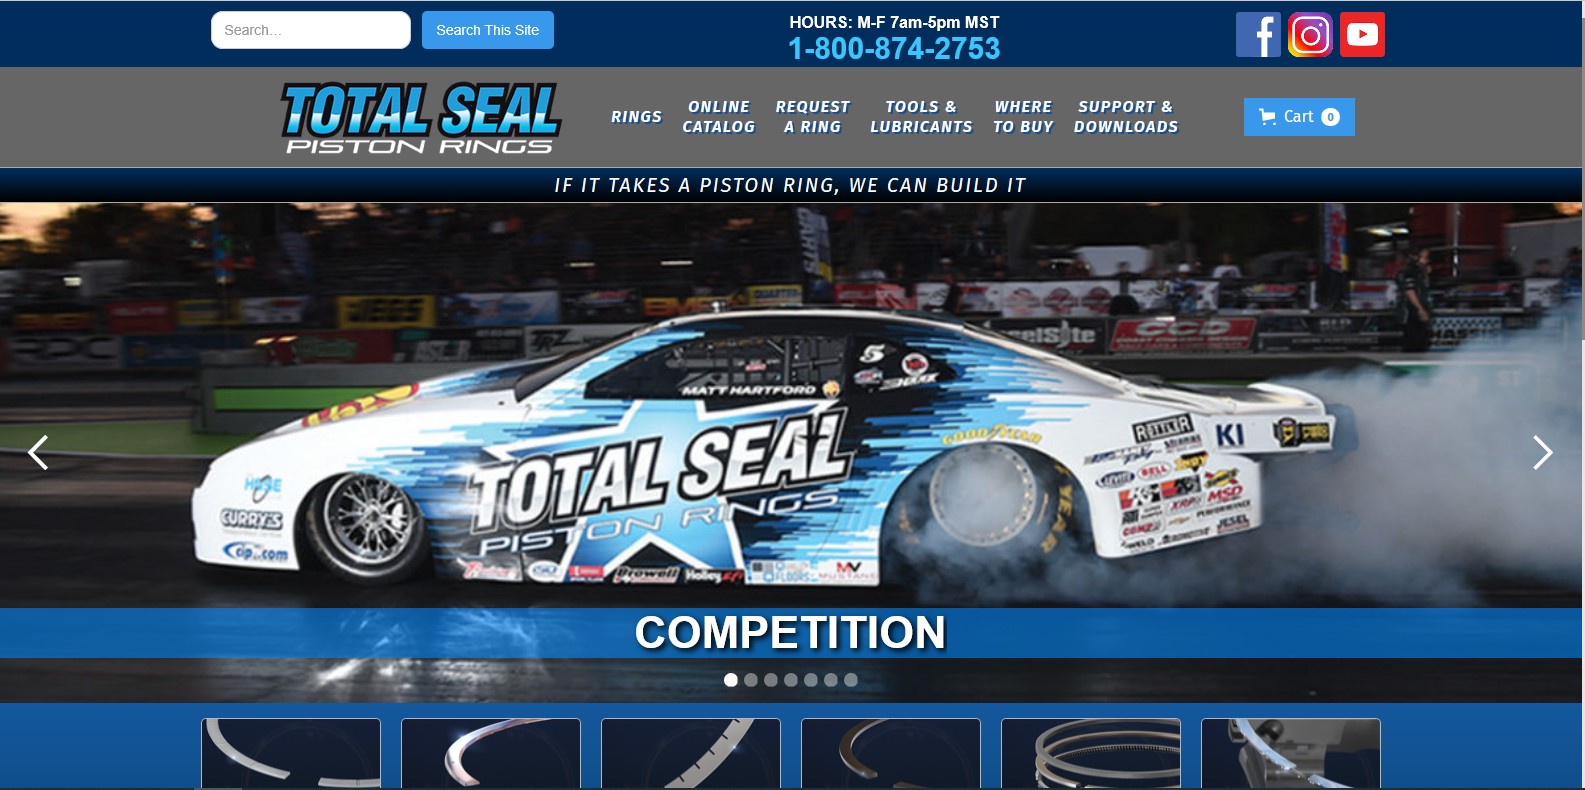 Total Seal Piston Rings Reveals New Website | THE SHOP